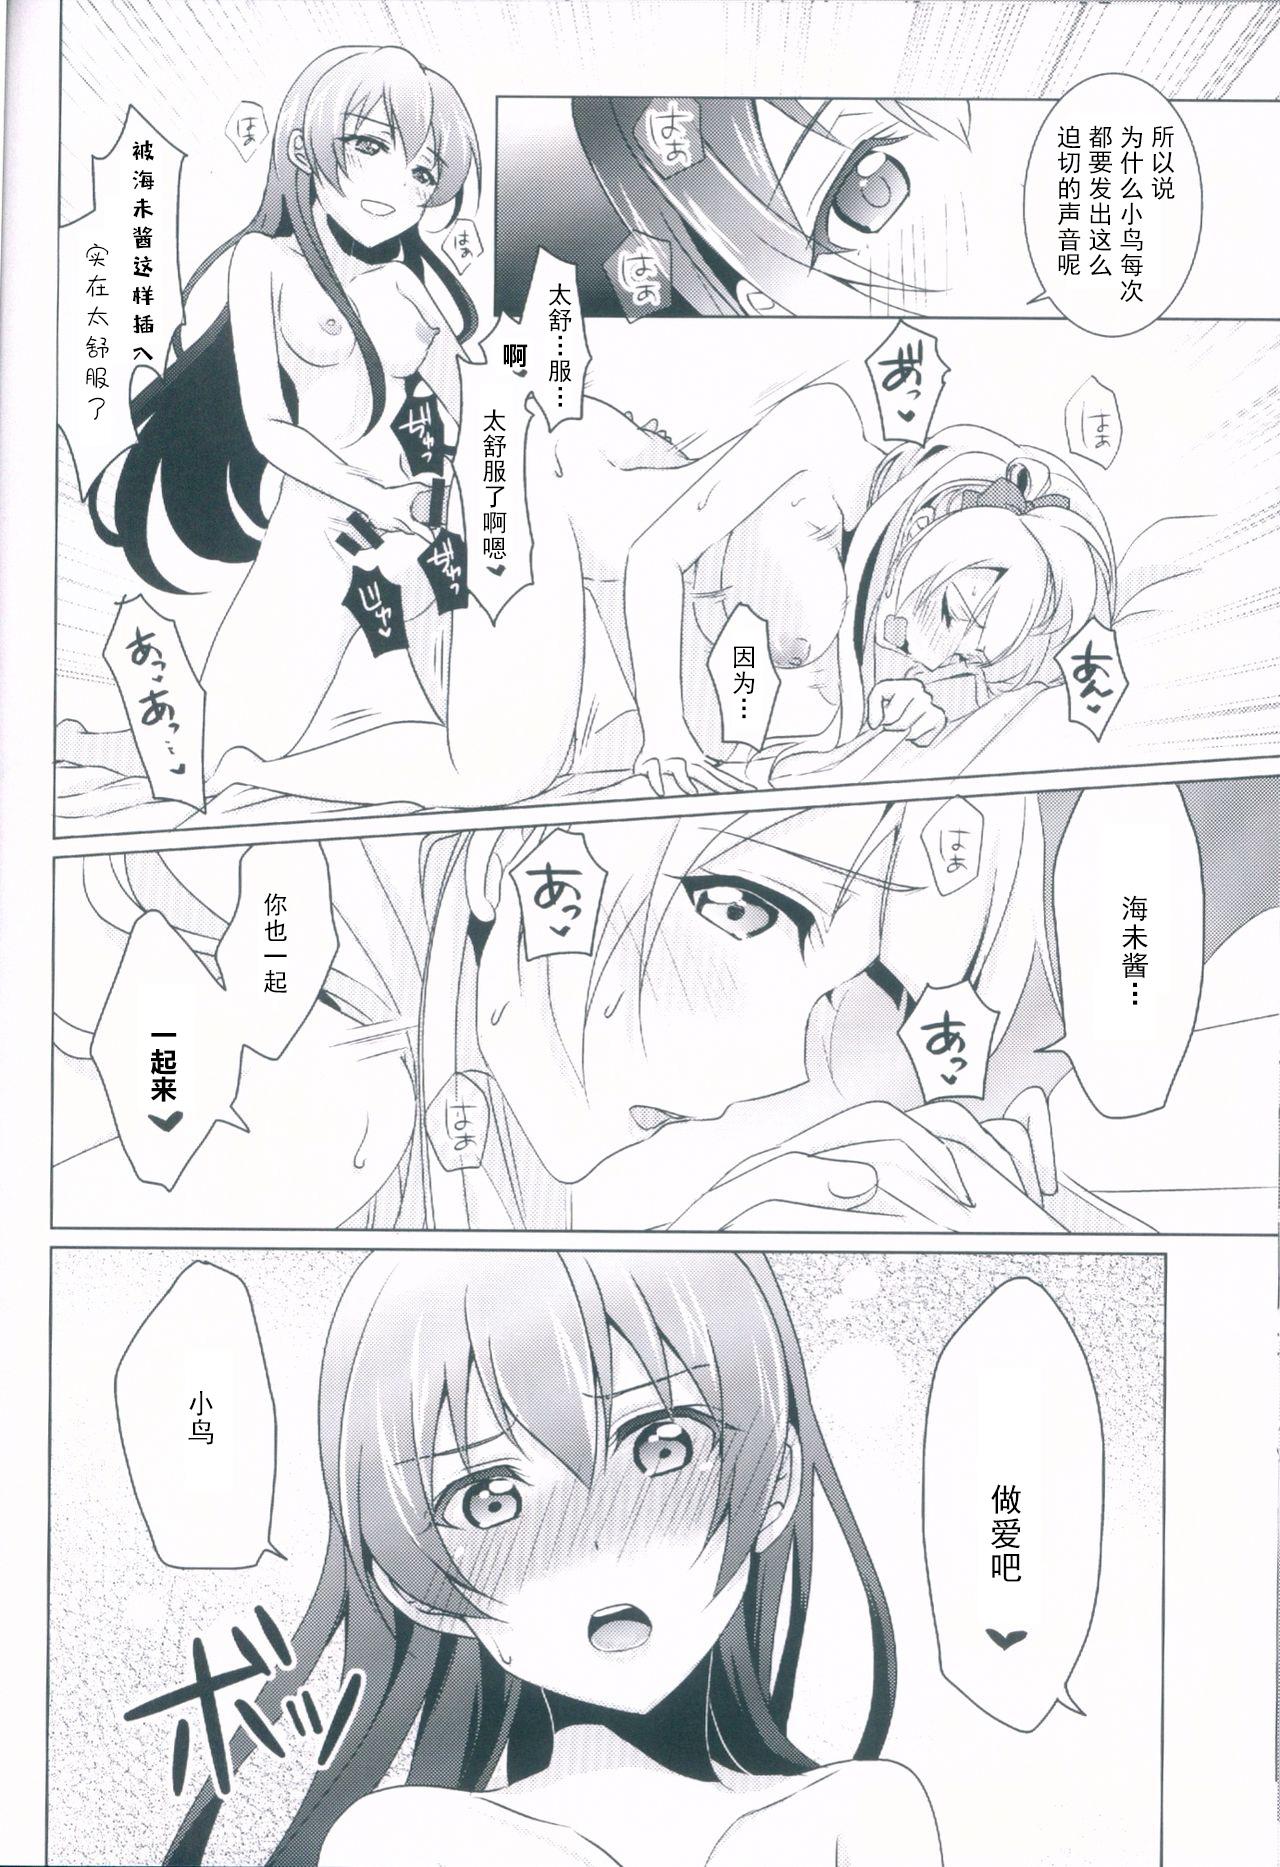 Butts honey*honey*days - Love live Speculum - Page 11